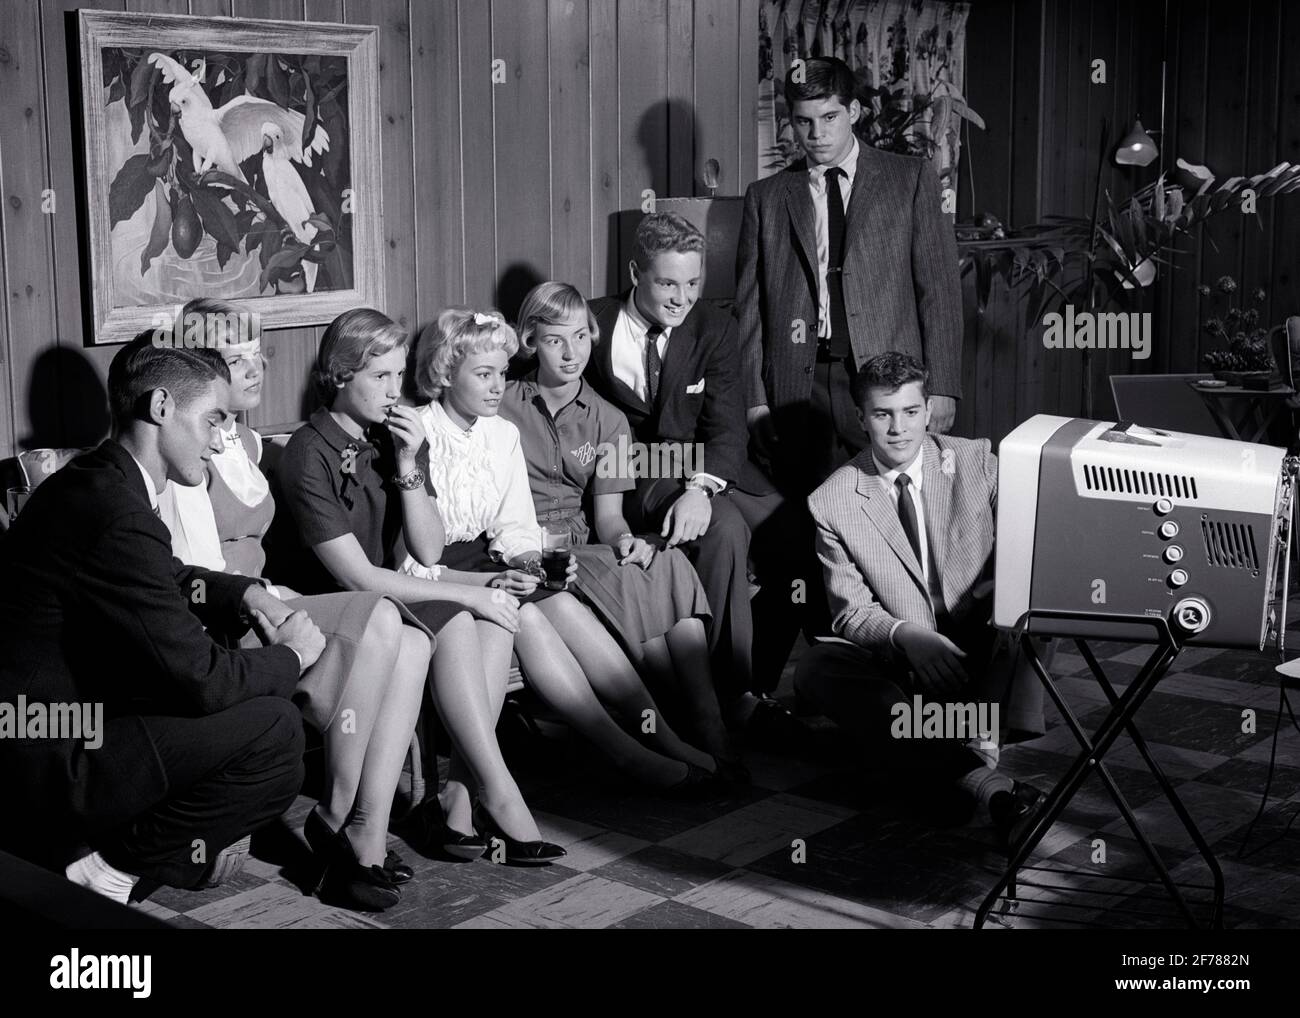 1950s 1960s GROUP OF TEENS BOYS AND GIRLS WATCHING A PORTABLE TELEVISION IN REC ROOM - j211 HAR001 HARS JOY LIFESTYLE CELEBRATION FEMALES BROTHERS HOME LIFE COPY SPACE FRIENDSHIP FULL-LENGTH PERSONS INSPIRATION CARING MALES TEENAGE GIRL TEENAGE BOY ENTERTAINMENT SIBLINGS SISTERS PORTABLE B&W SCHOOLS WIDE ANGLE SUIT AND TIE 8 HAPPINESS DISCOVERY LEISURE AND EXCITEMENT KNOWLEDGE POWERFUL REC RECREATION A IN OF HIGH SCHOOL SIBLING HIGH SCHOOLS CONNECTION CONCEPTUAL STYLISH TEENAGED EIGHT GROWTH IDEAS JUVENILES RELAXATION TOGETHERNESS BLACK AND WHITE CAUCASIAN ETHNICITY HAR001 OLD FASHIONED Stock Photo